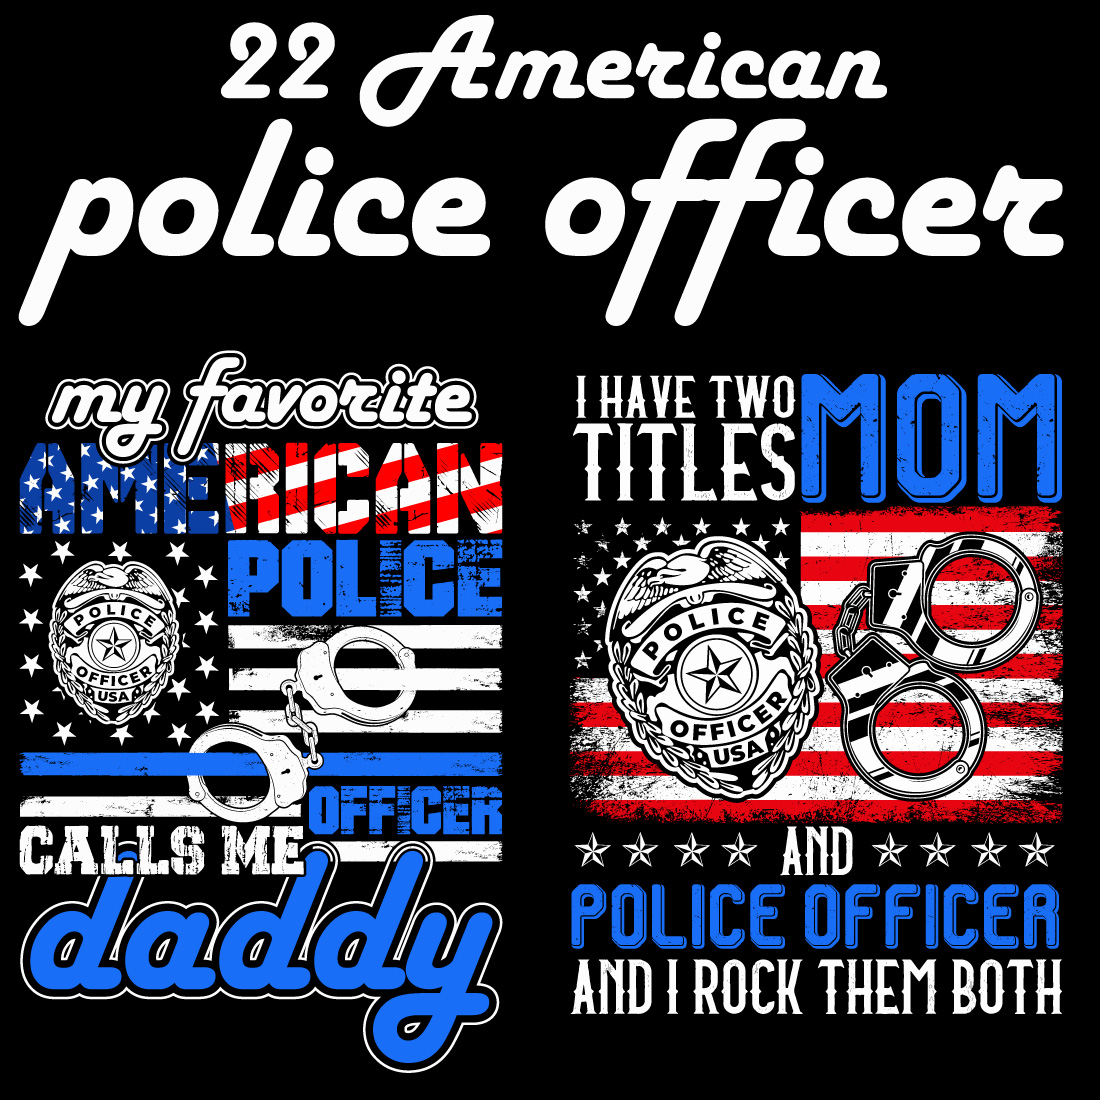 22 American Police Officer T-shirt Designs Bundle cover image.